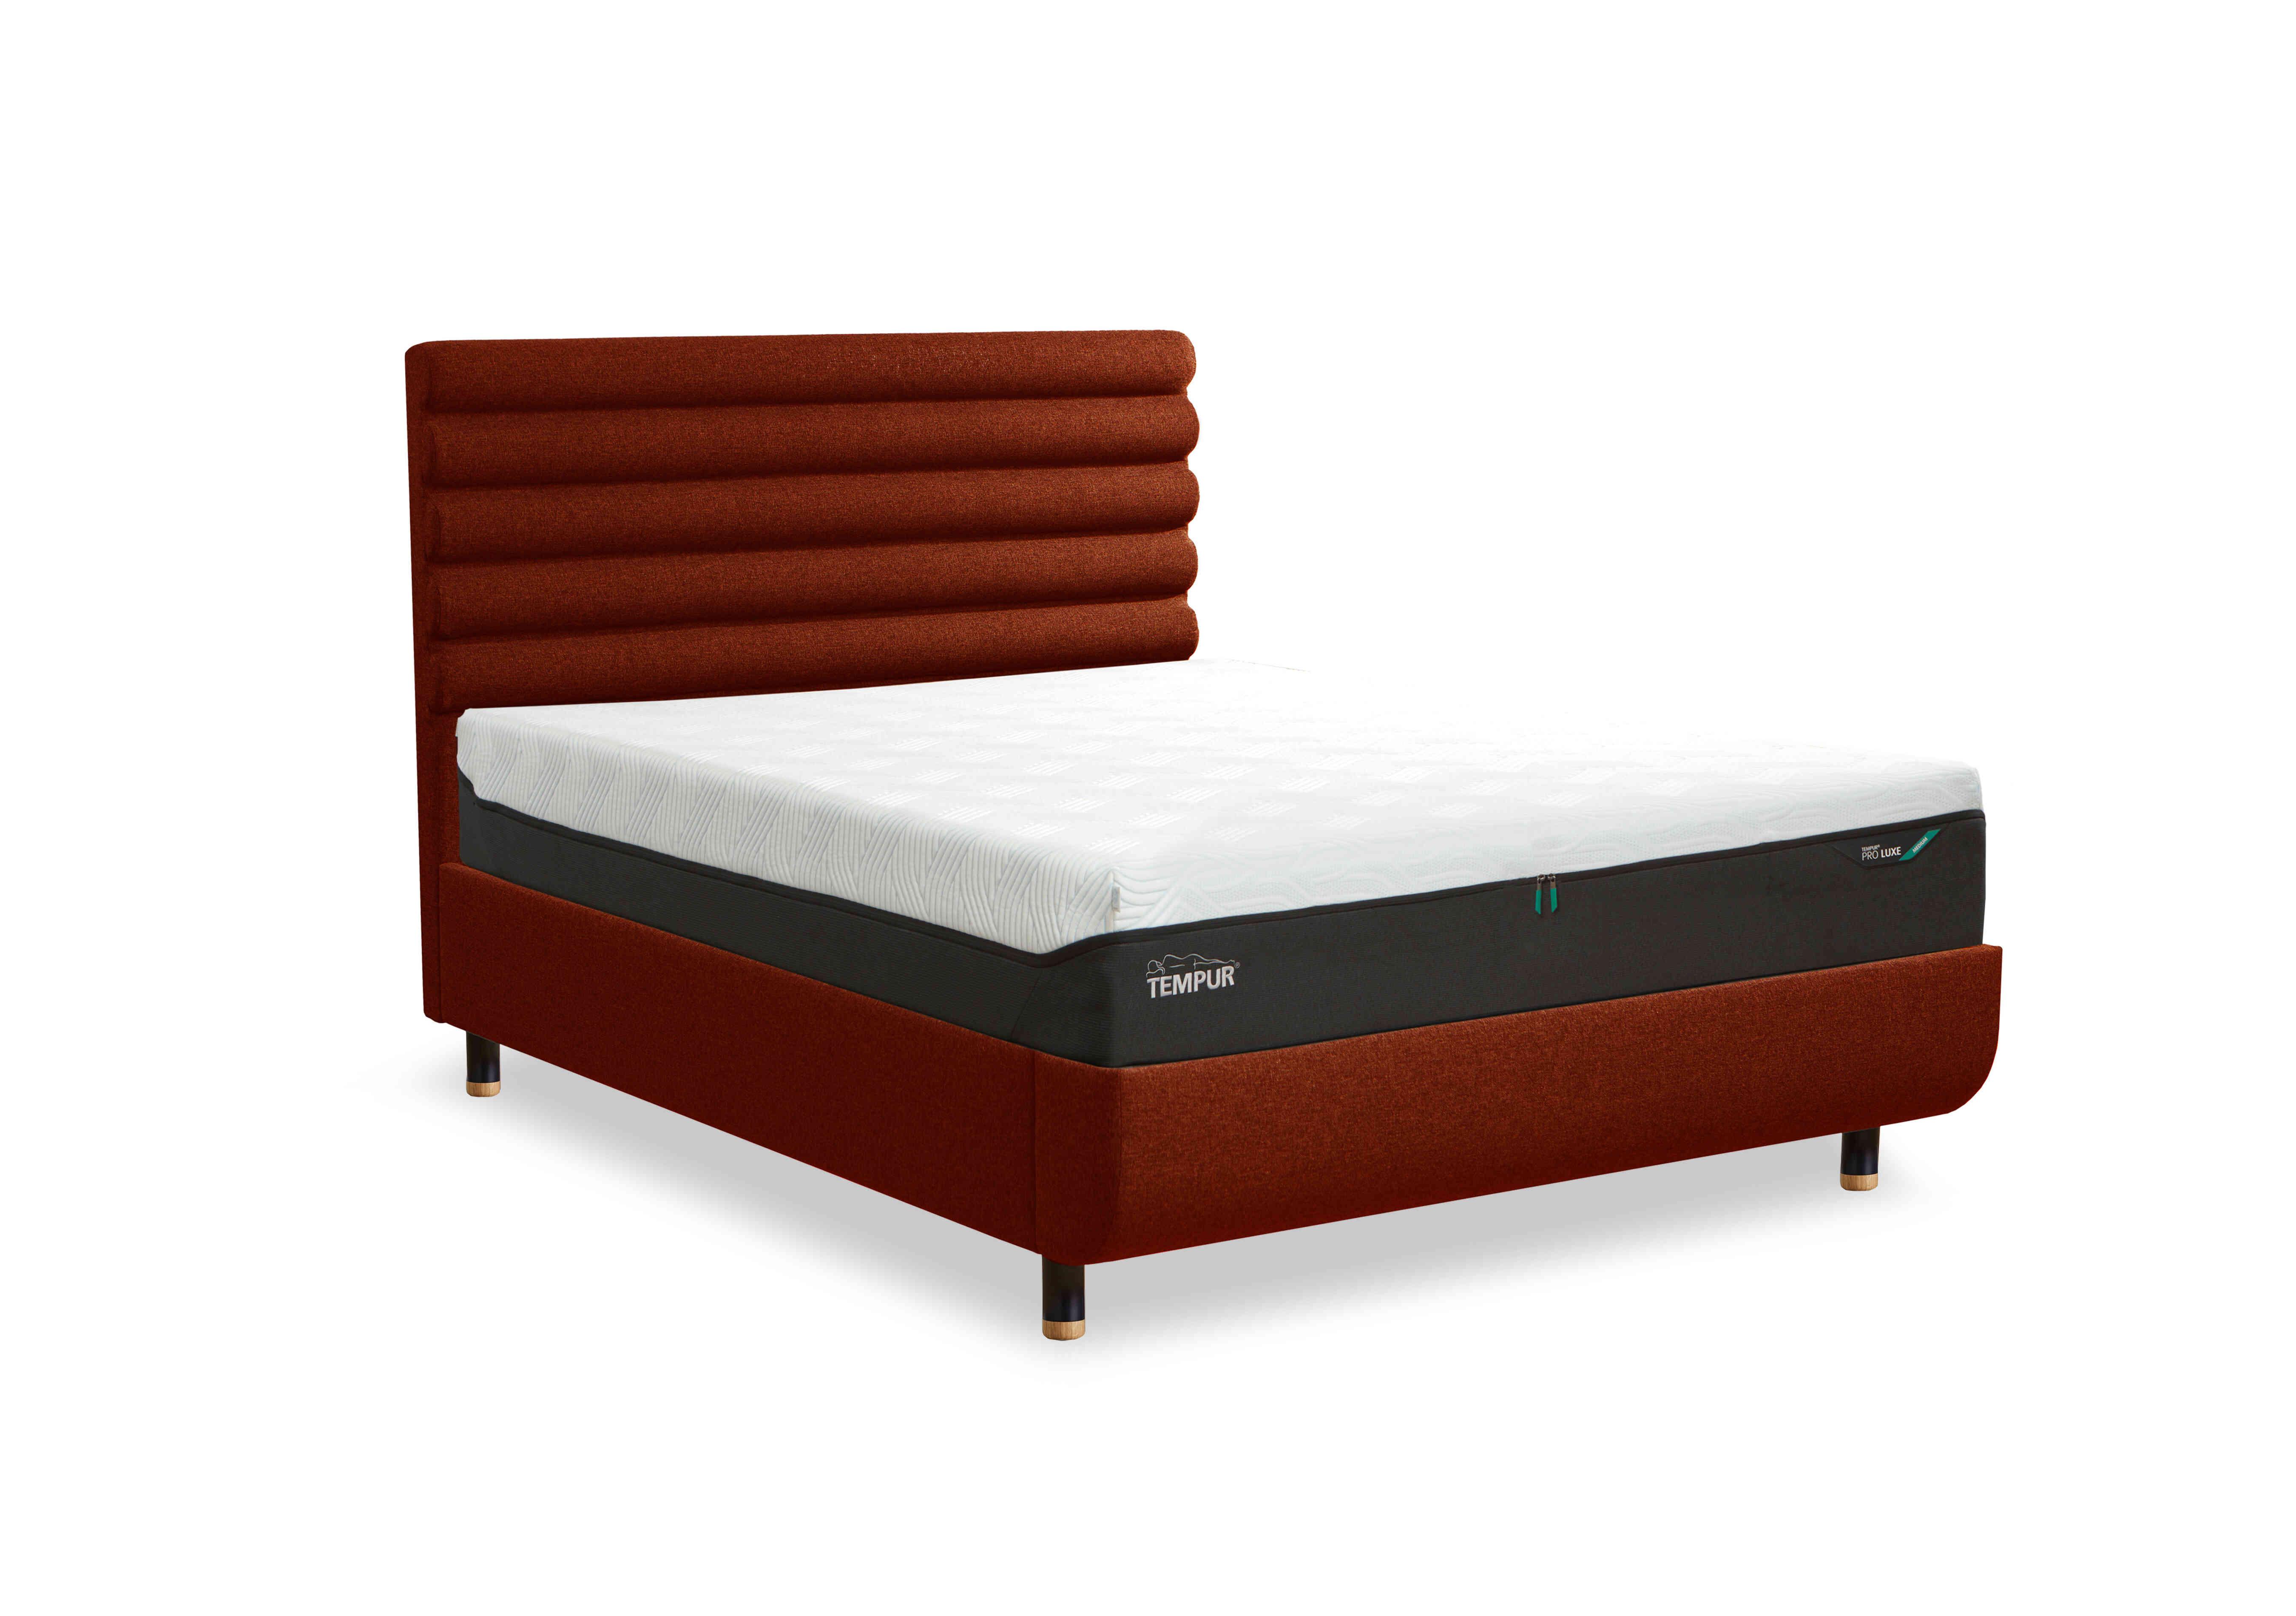 Arc Slatted Ottoman Bed Frame with Vectra Headboard in Copper-Black/Gold Feet on Furniture Village